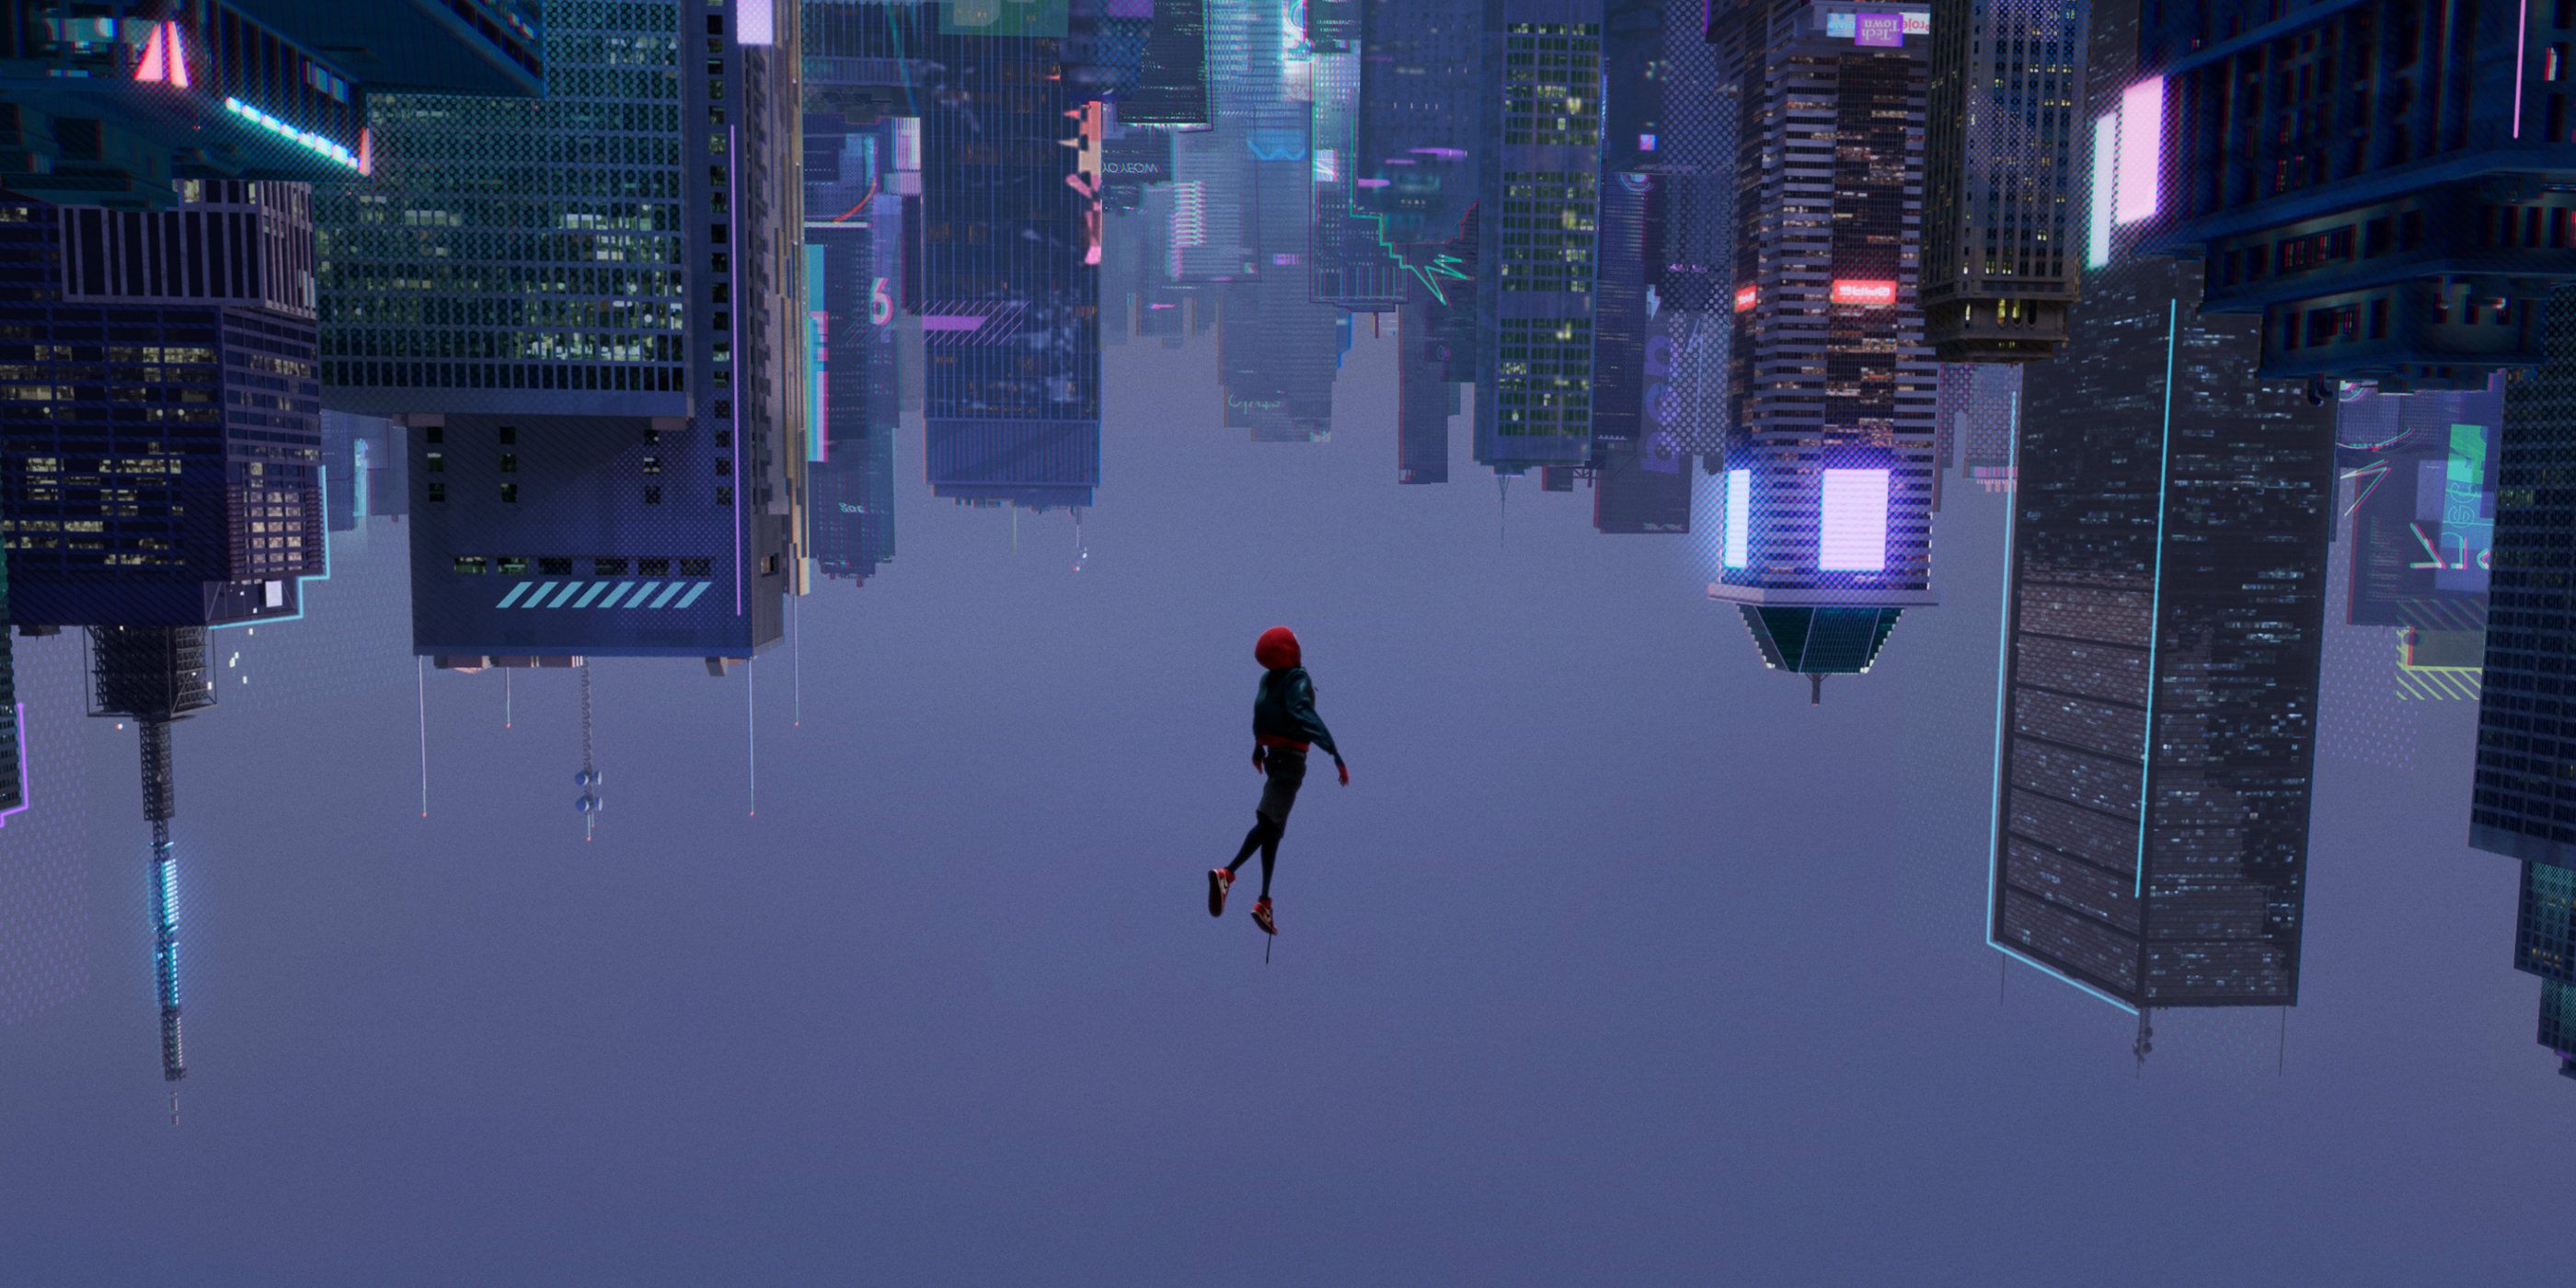 Spider-Man falling into an upside down city in Spider-Man: Into The Spider-Verse.